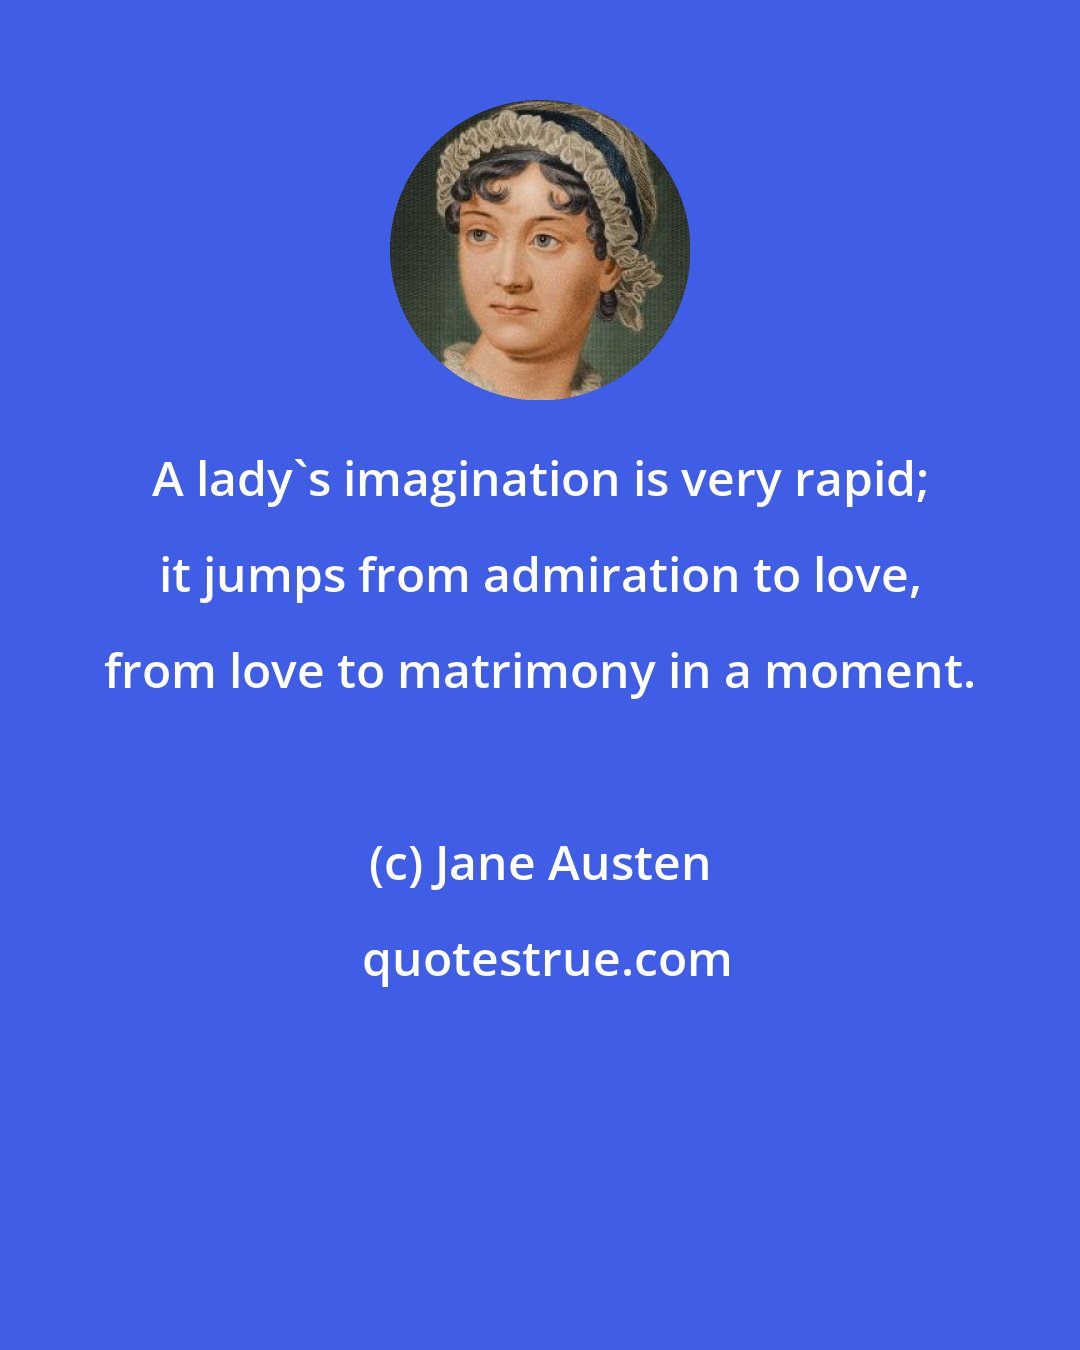 Jane Austen: A lady's imagination is very rapid; it jumps from admiration to love, from love to matrimony in a moment.